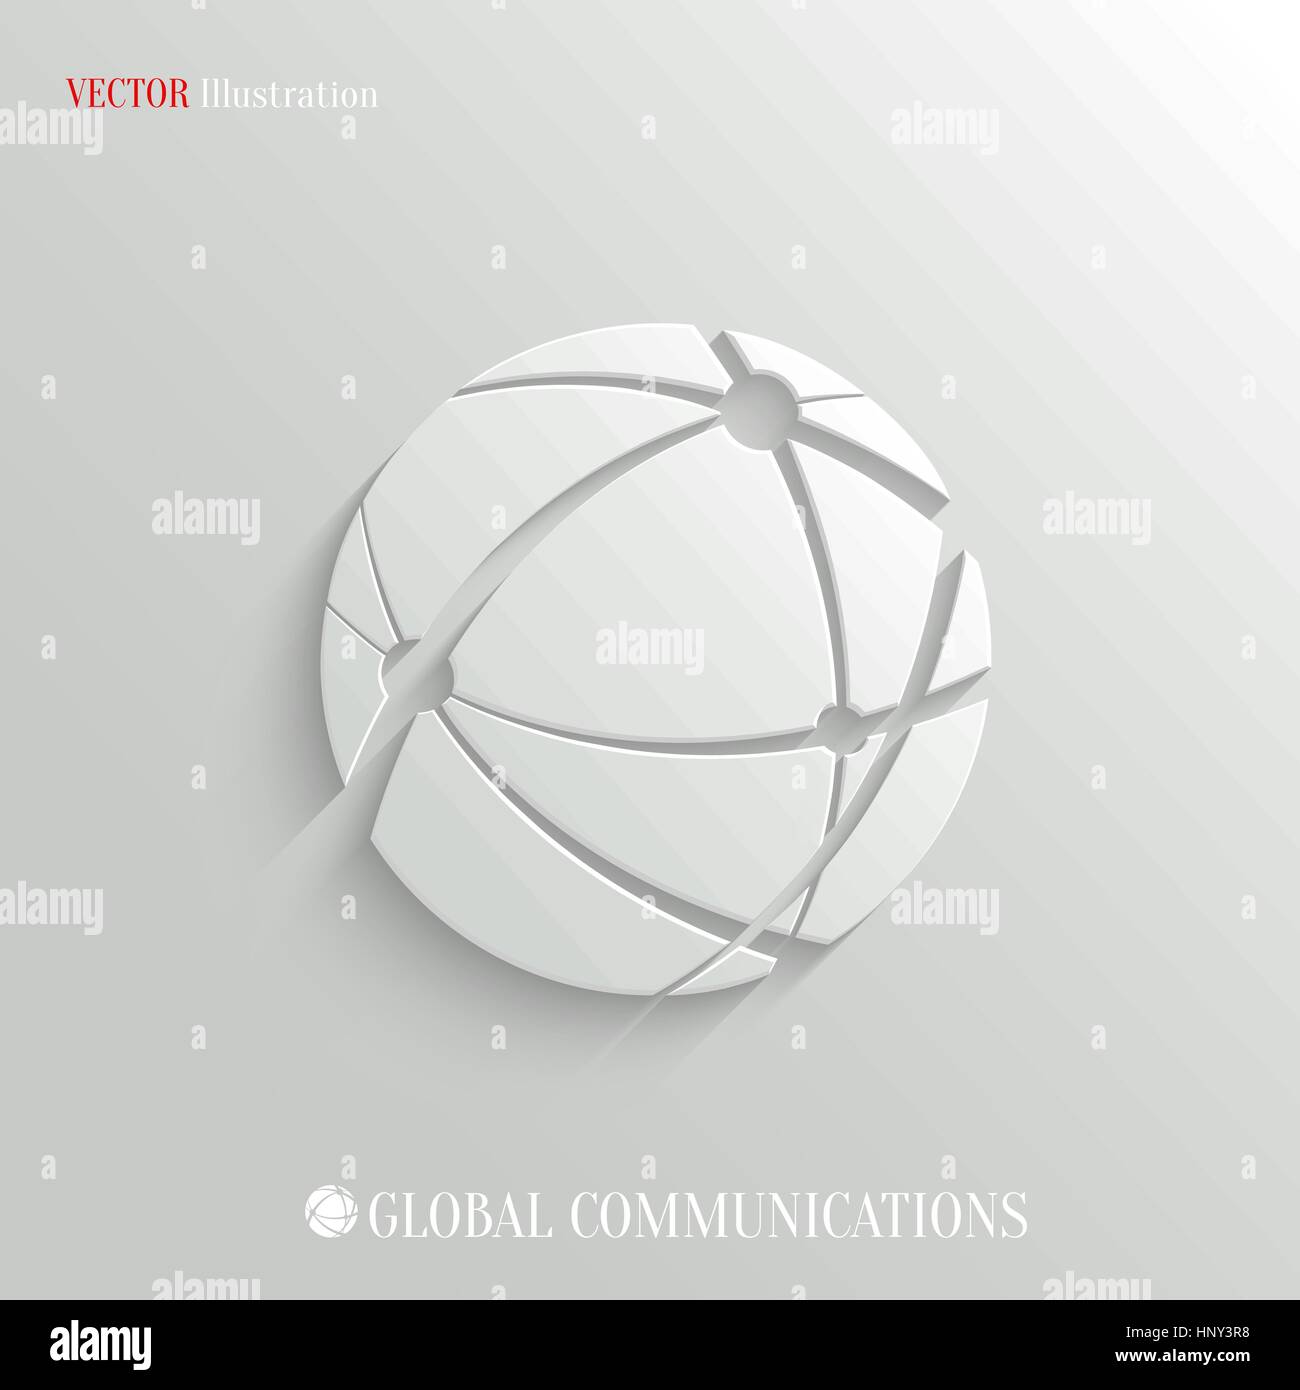 Global communications icon - vector web illustration, easy paste to any background Stock Vector